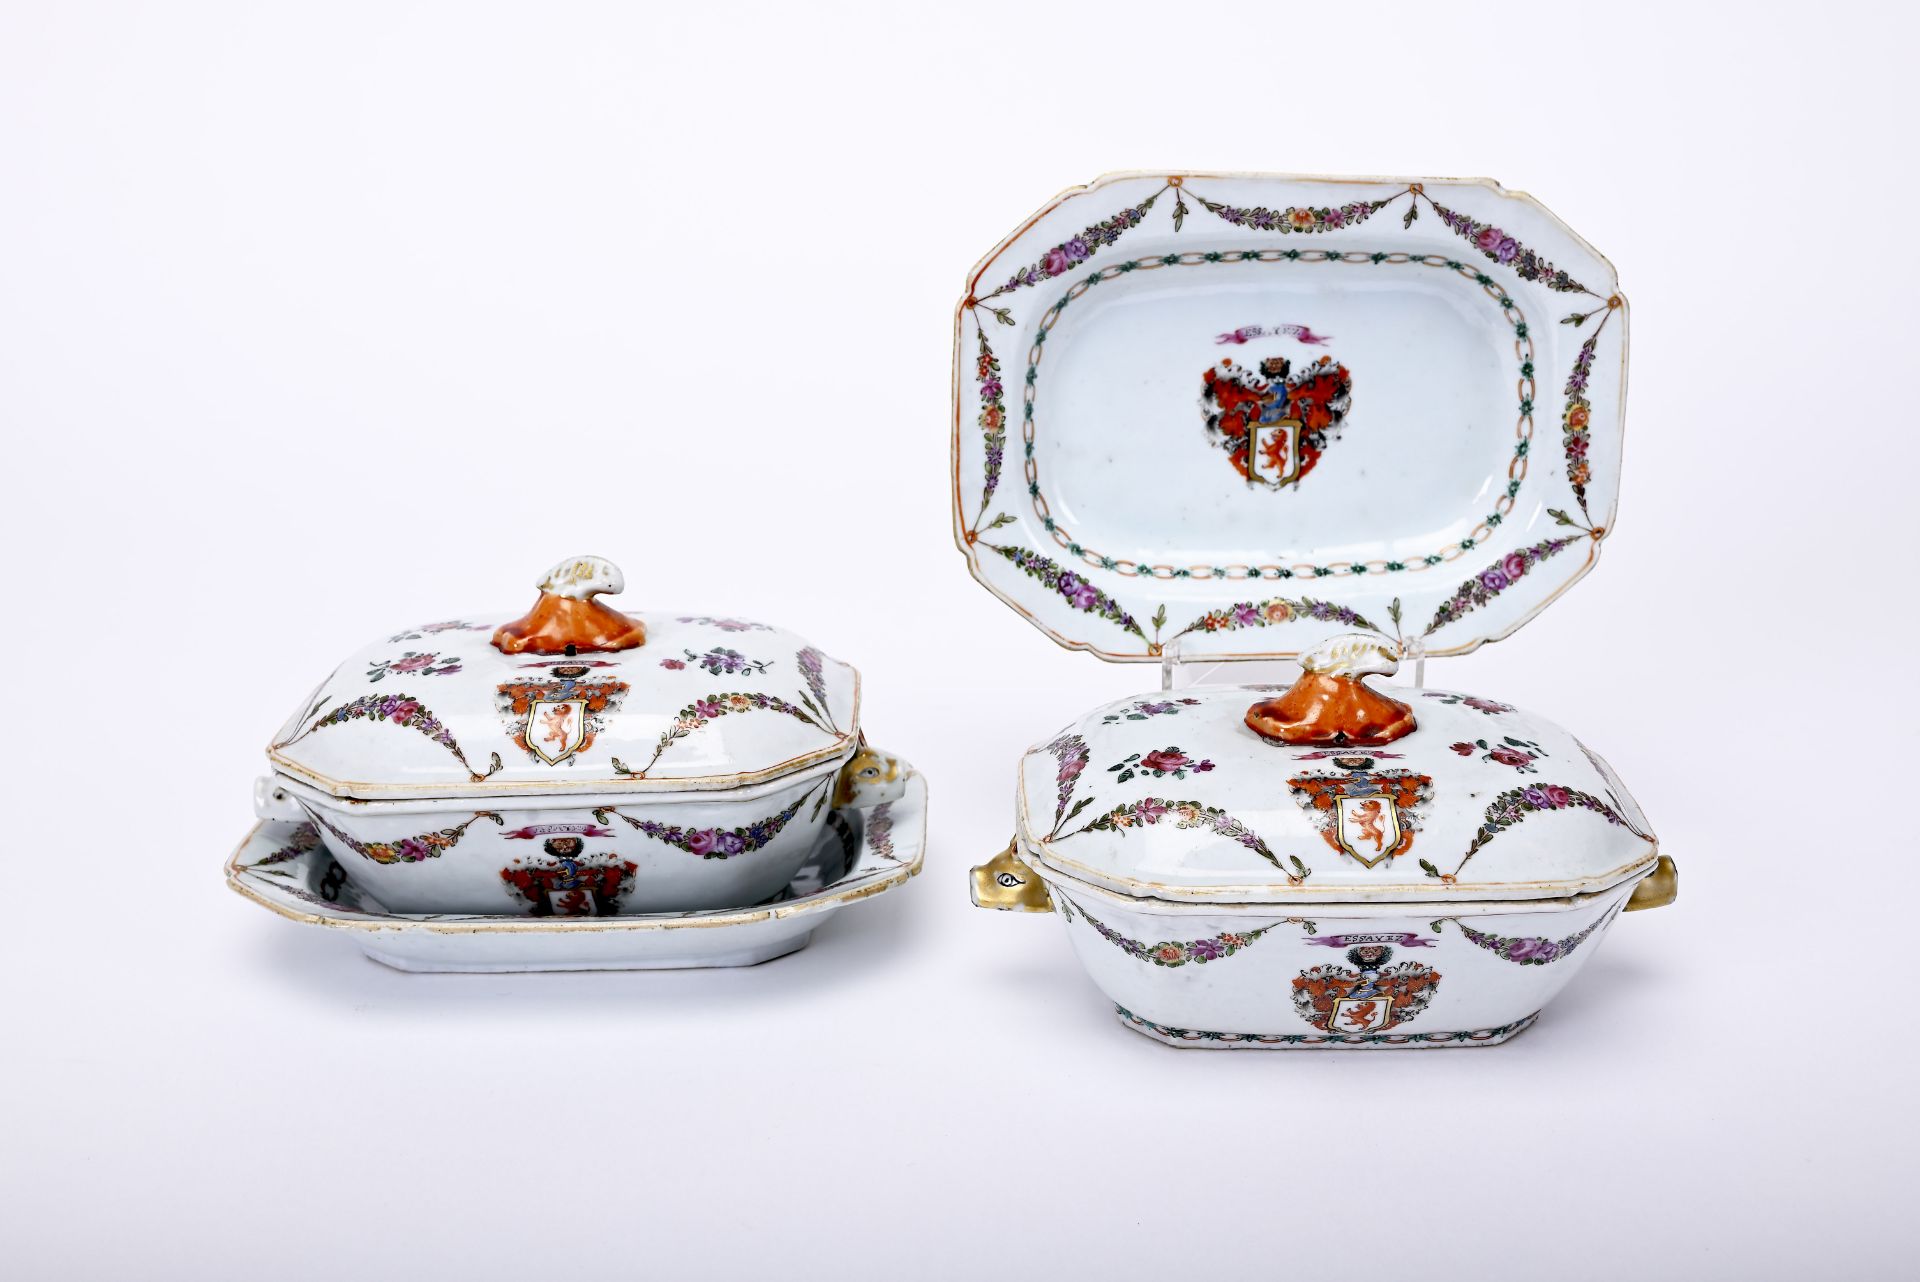 A pair of small tureens with stand